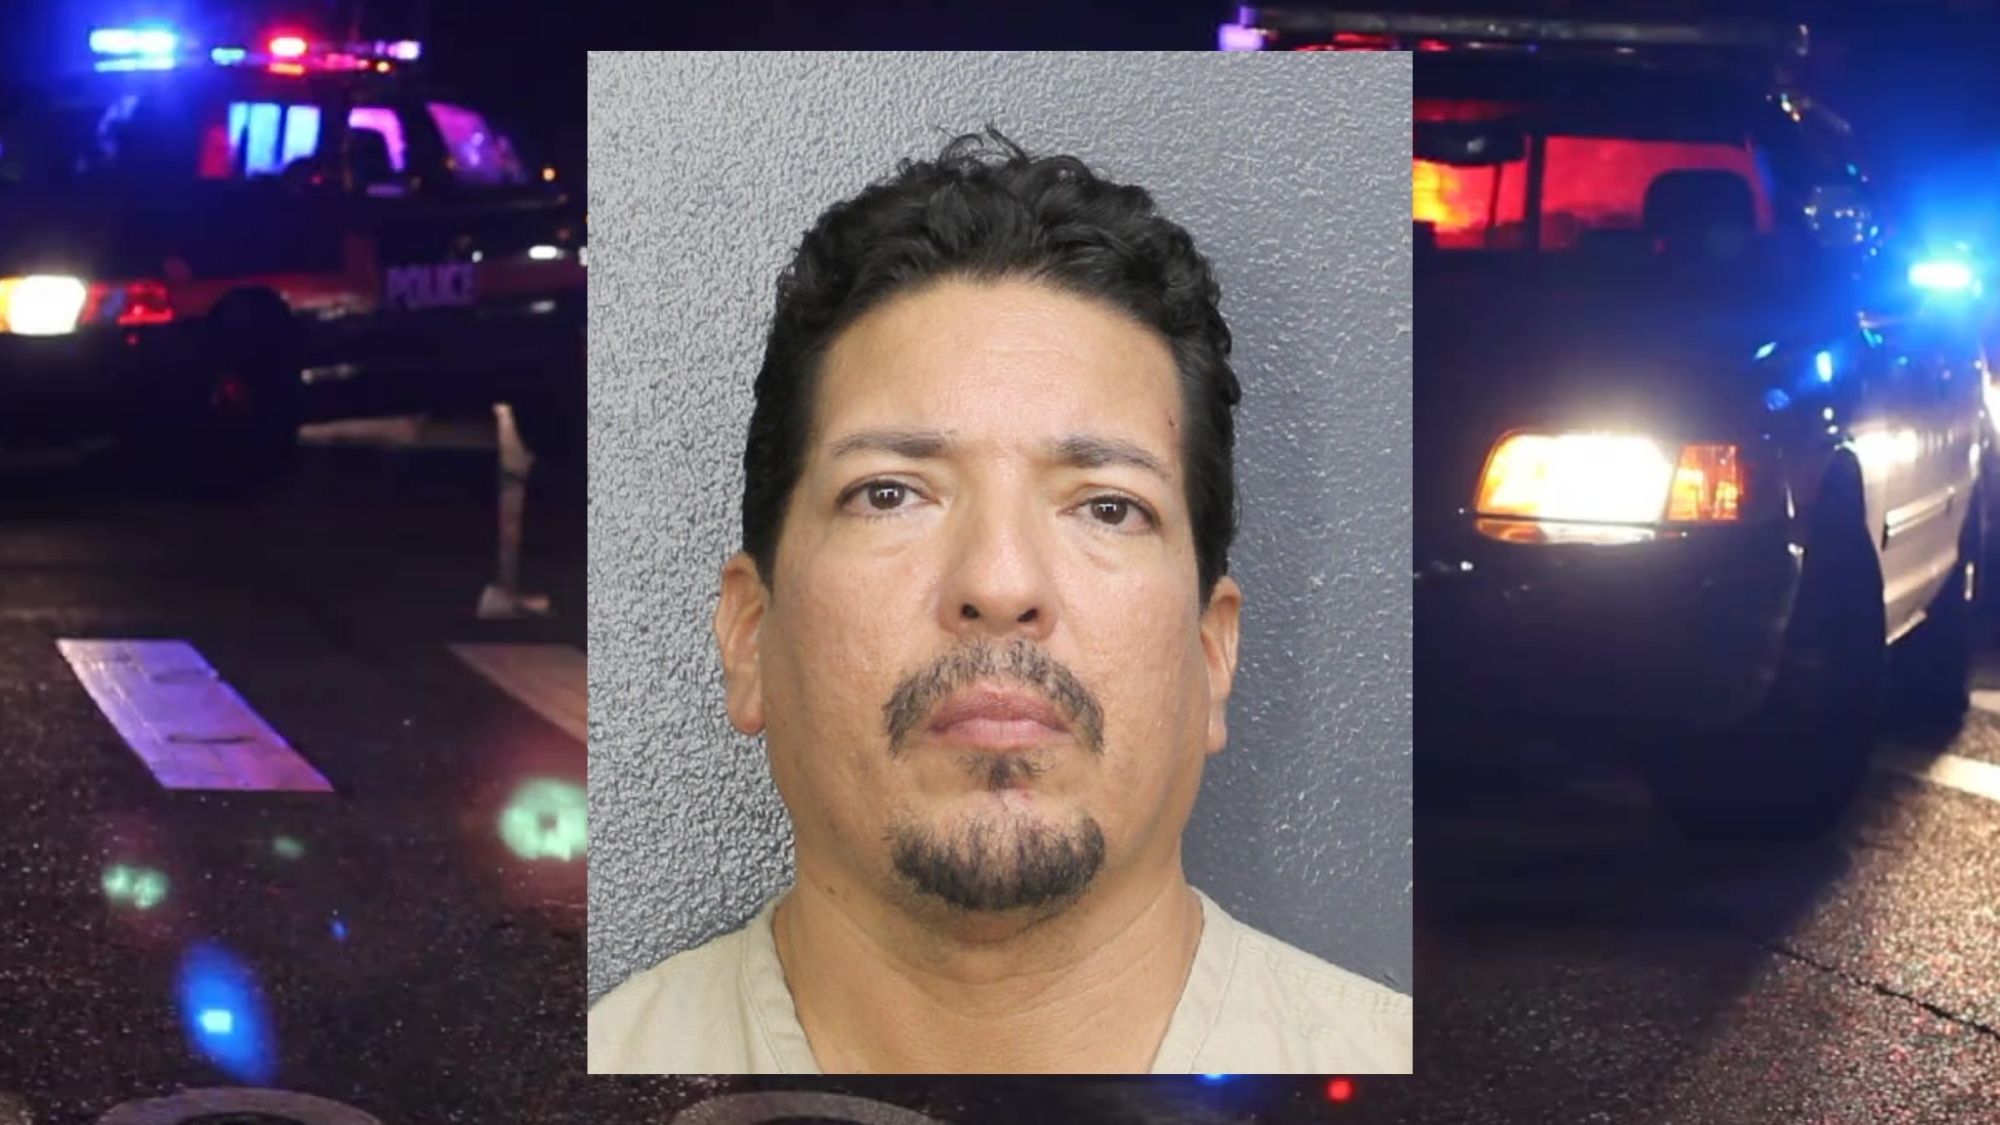 Tamarac Man Arrested on Child Pornography Charges After Investigation by Broward Sheriff’s Office